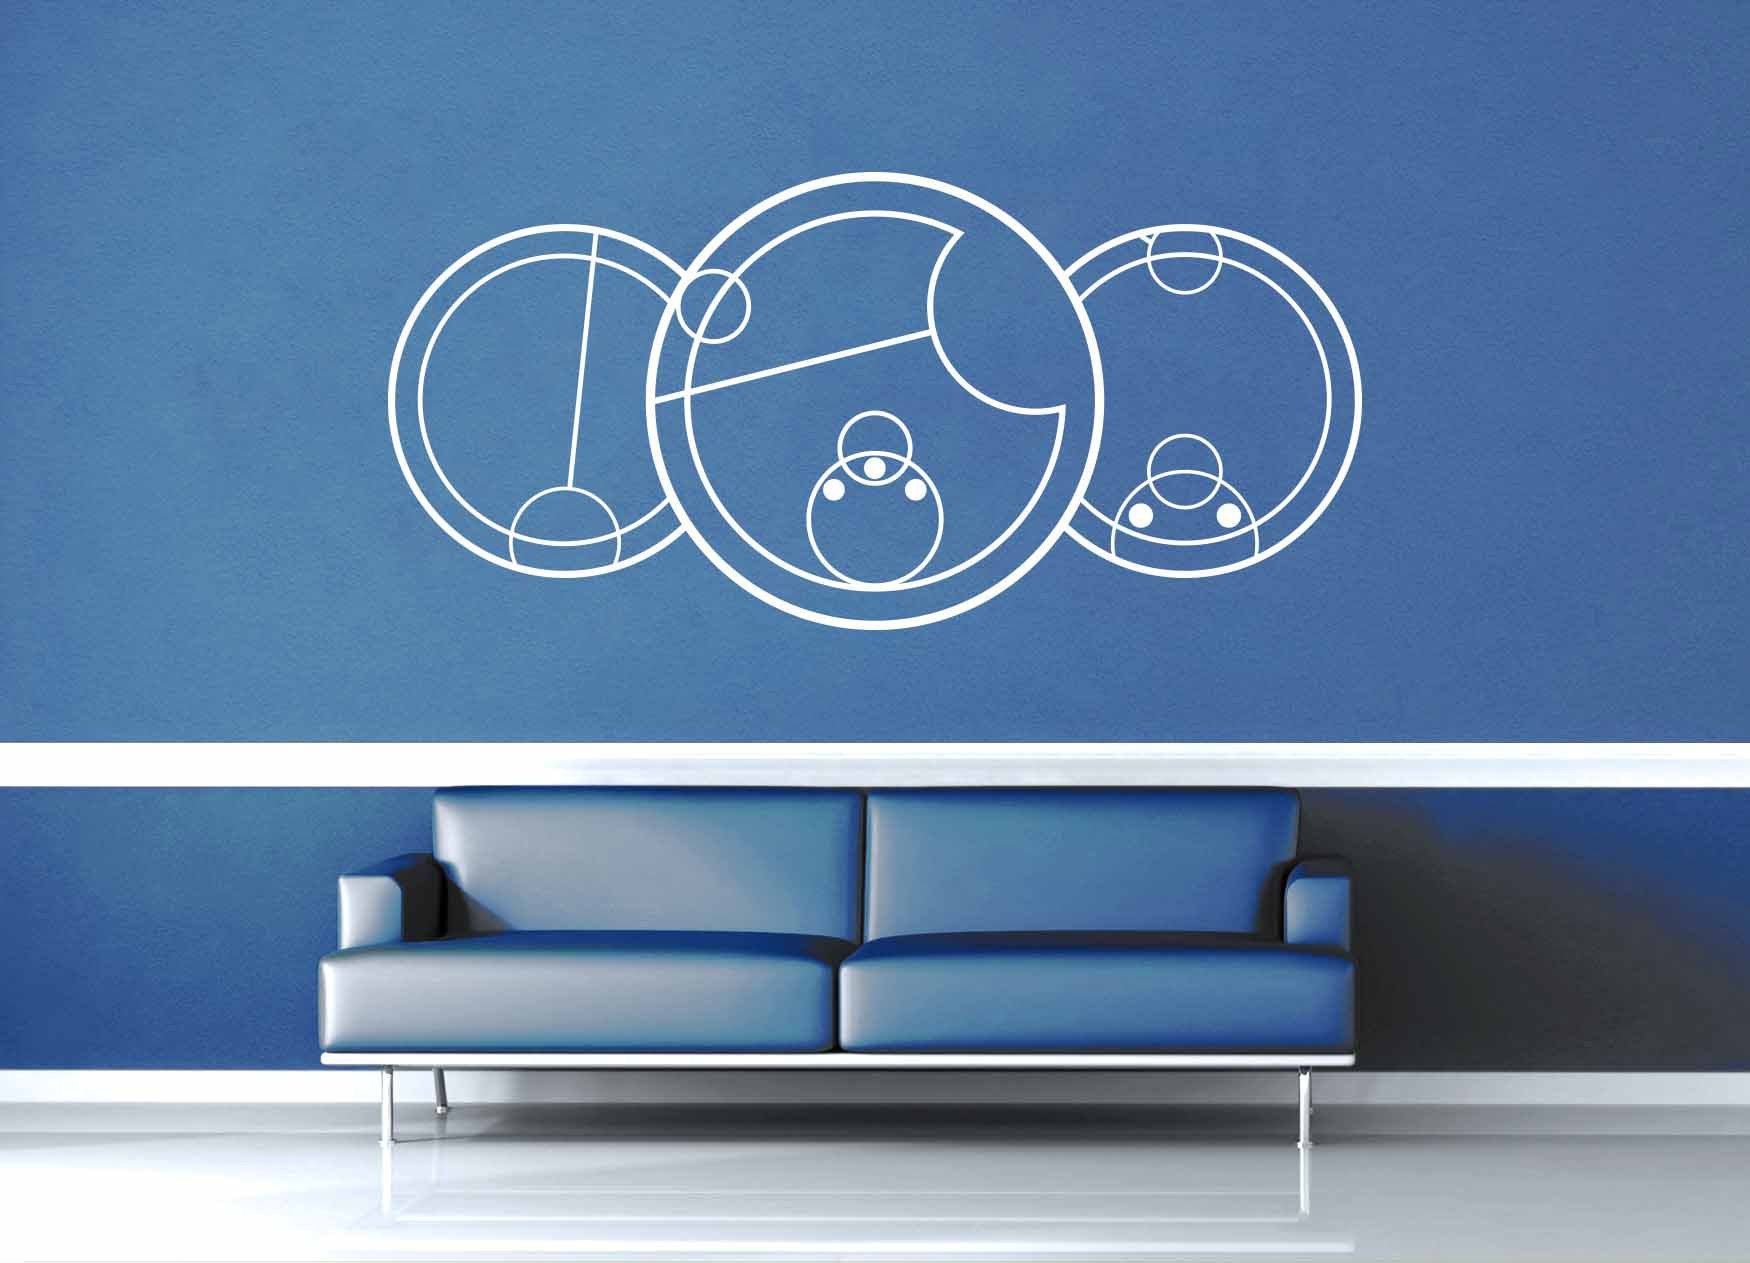 I Love You - Gallifreyan - Doctor Who Quote - Wall Decal $8.95